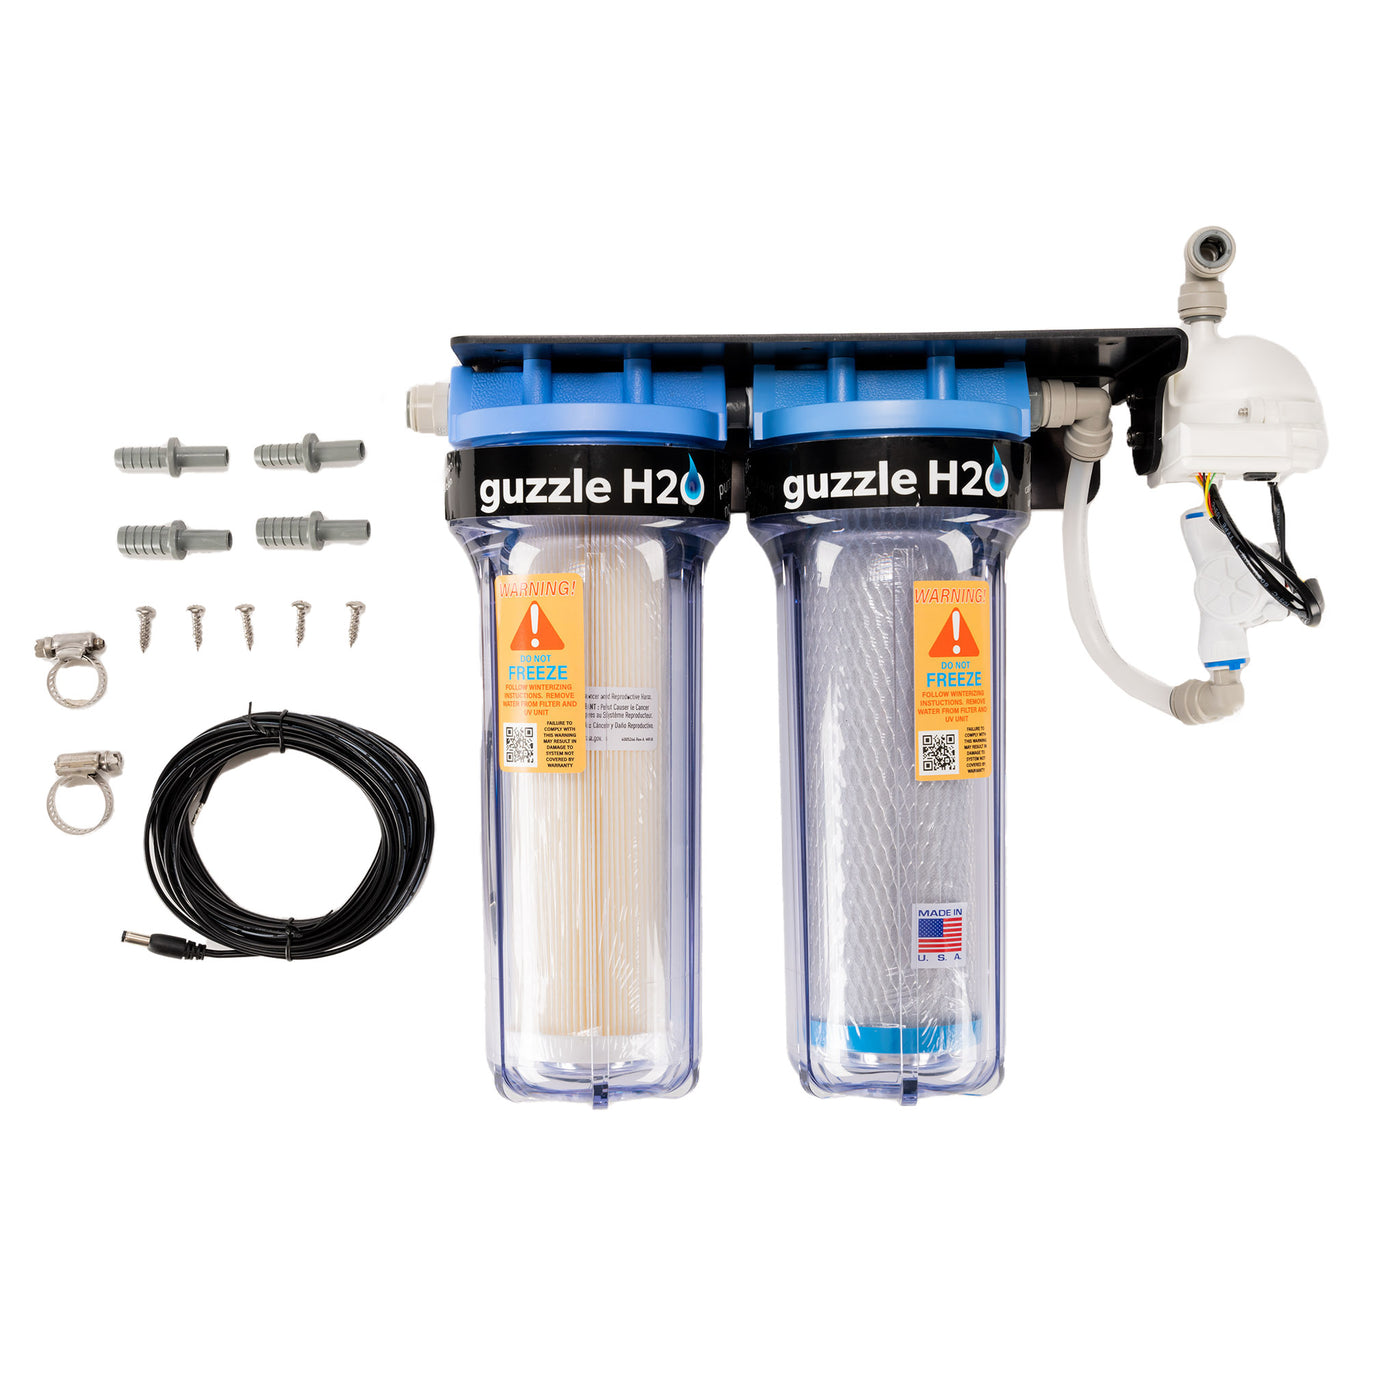 Guzzle H2O Stealth 2x10 Water Purification and Filtration System